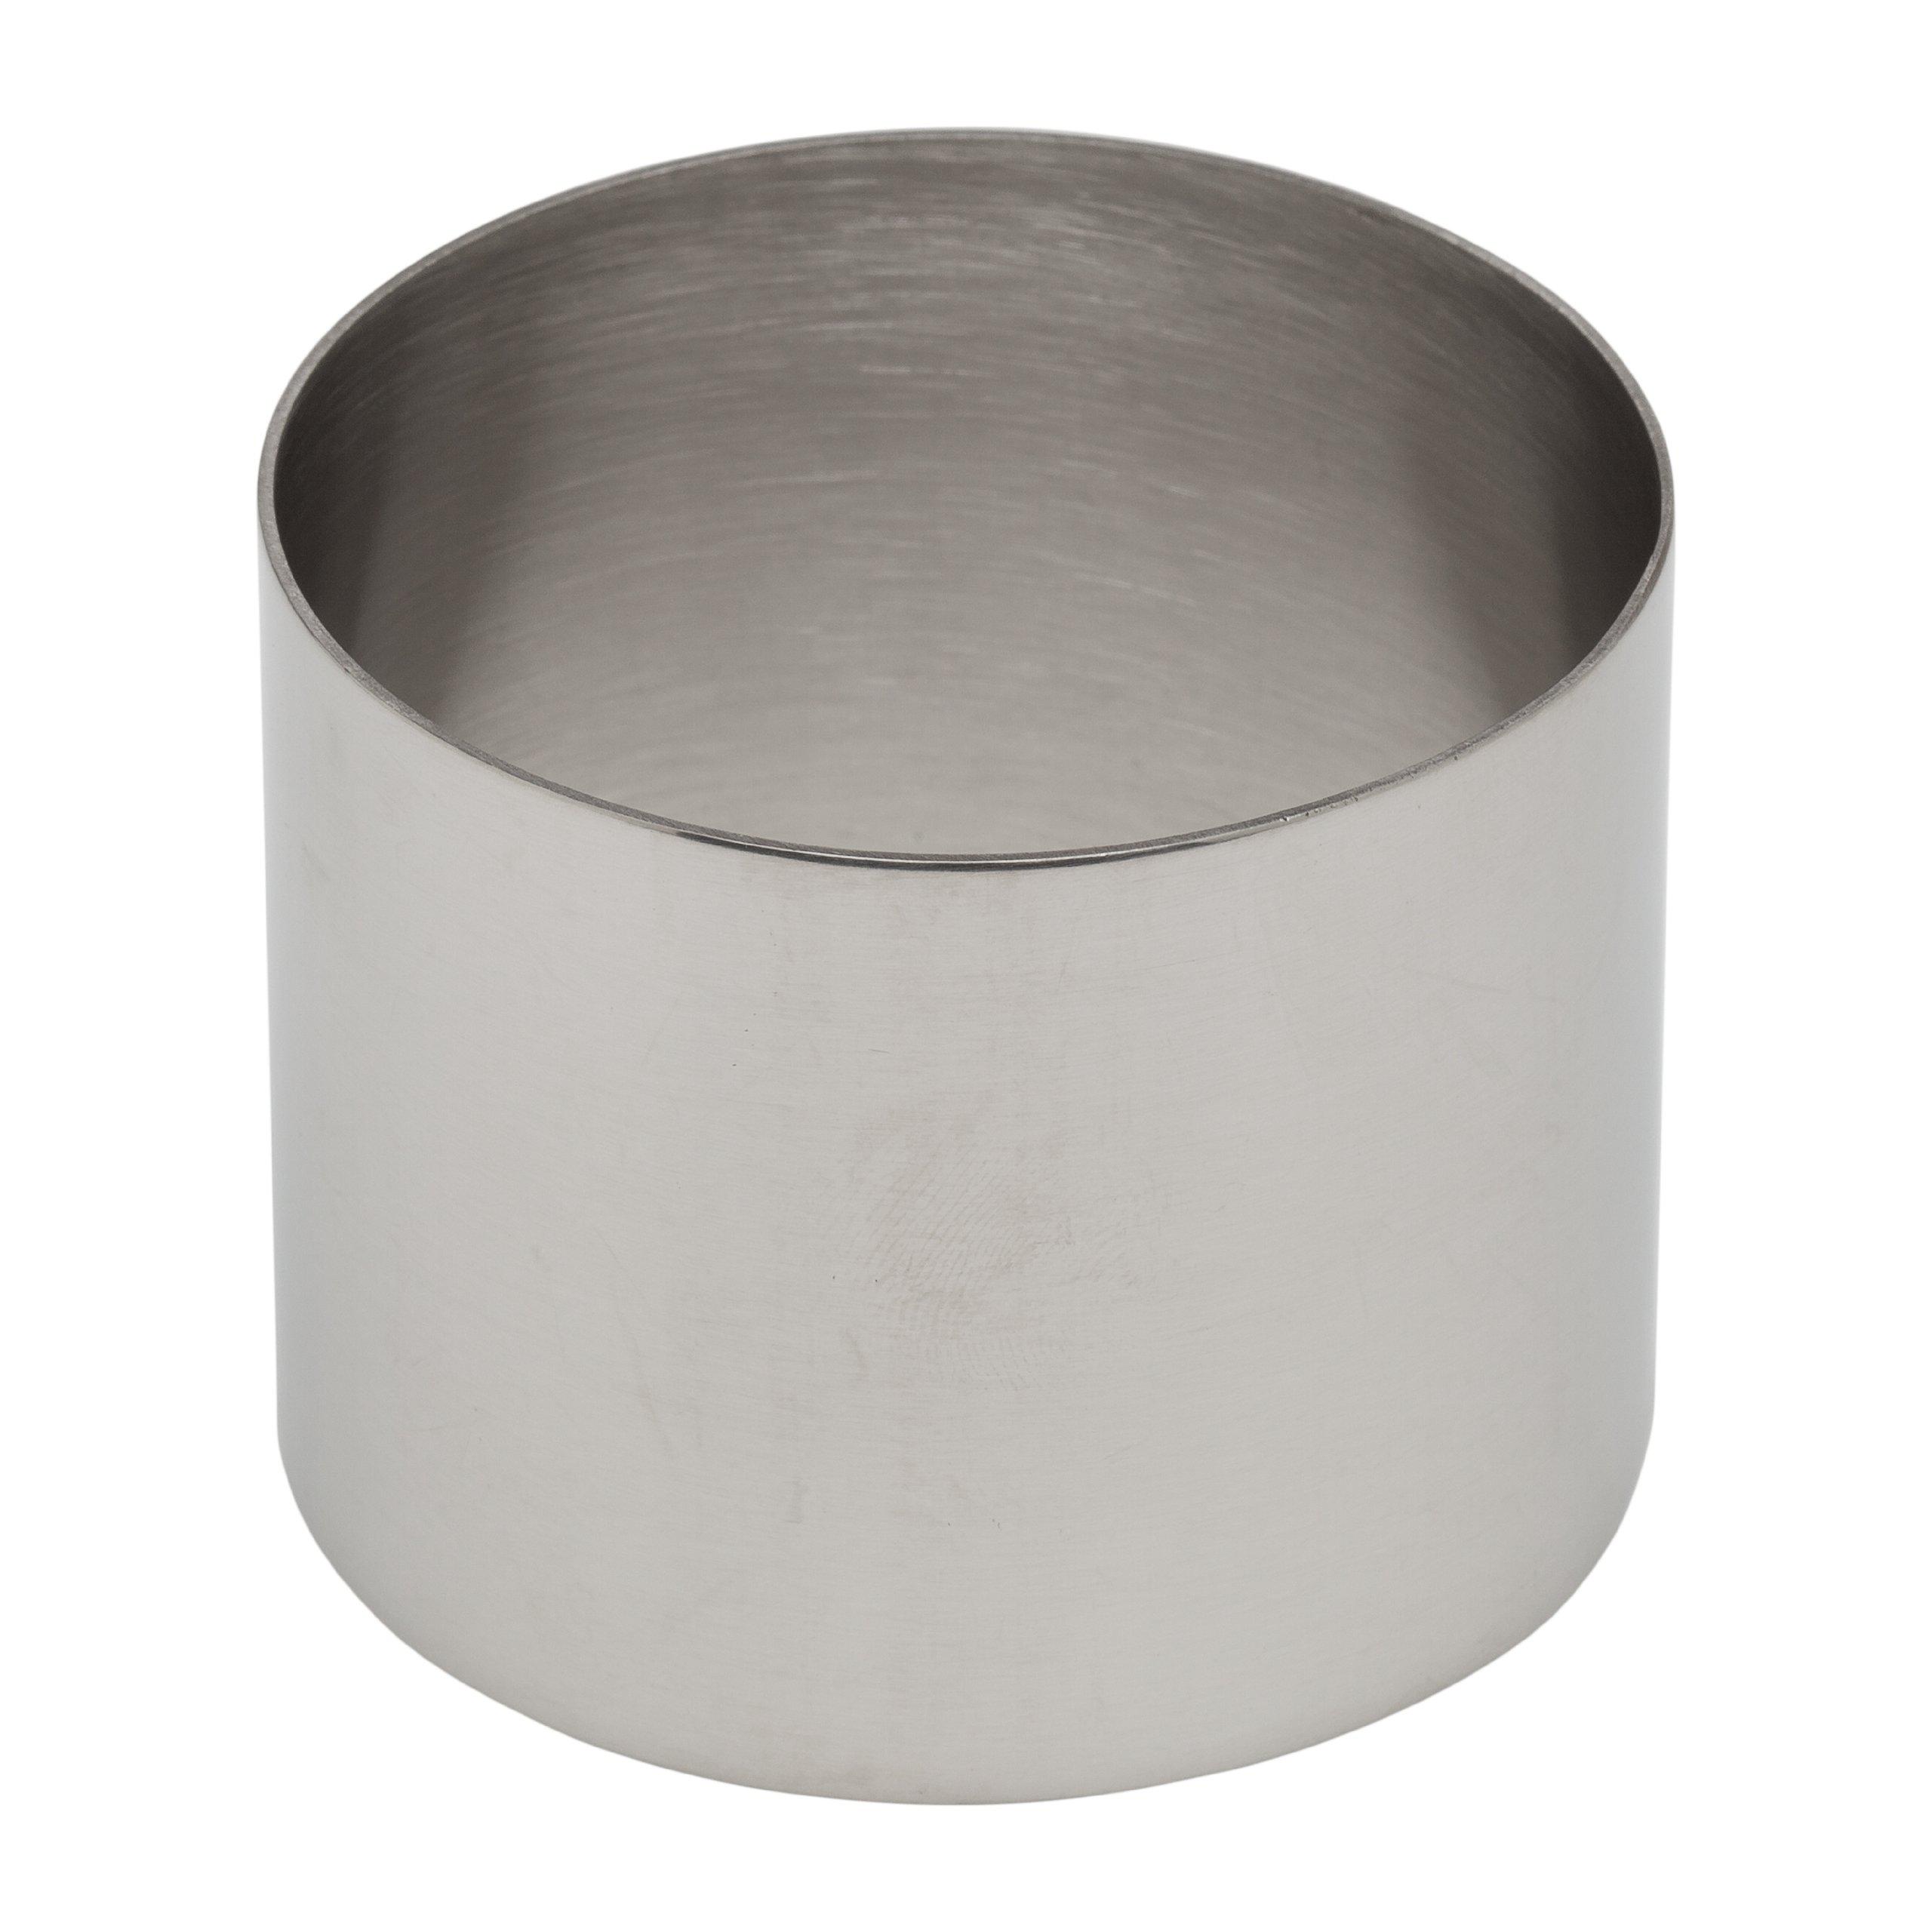 ateco stainless steel ring mold, 2.75 by 2.1-inches high, compatible with 4950 food molding set